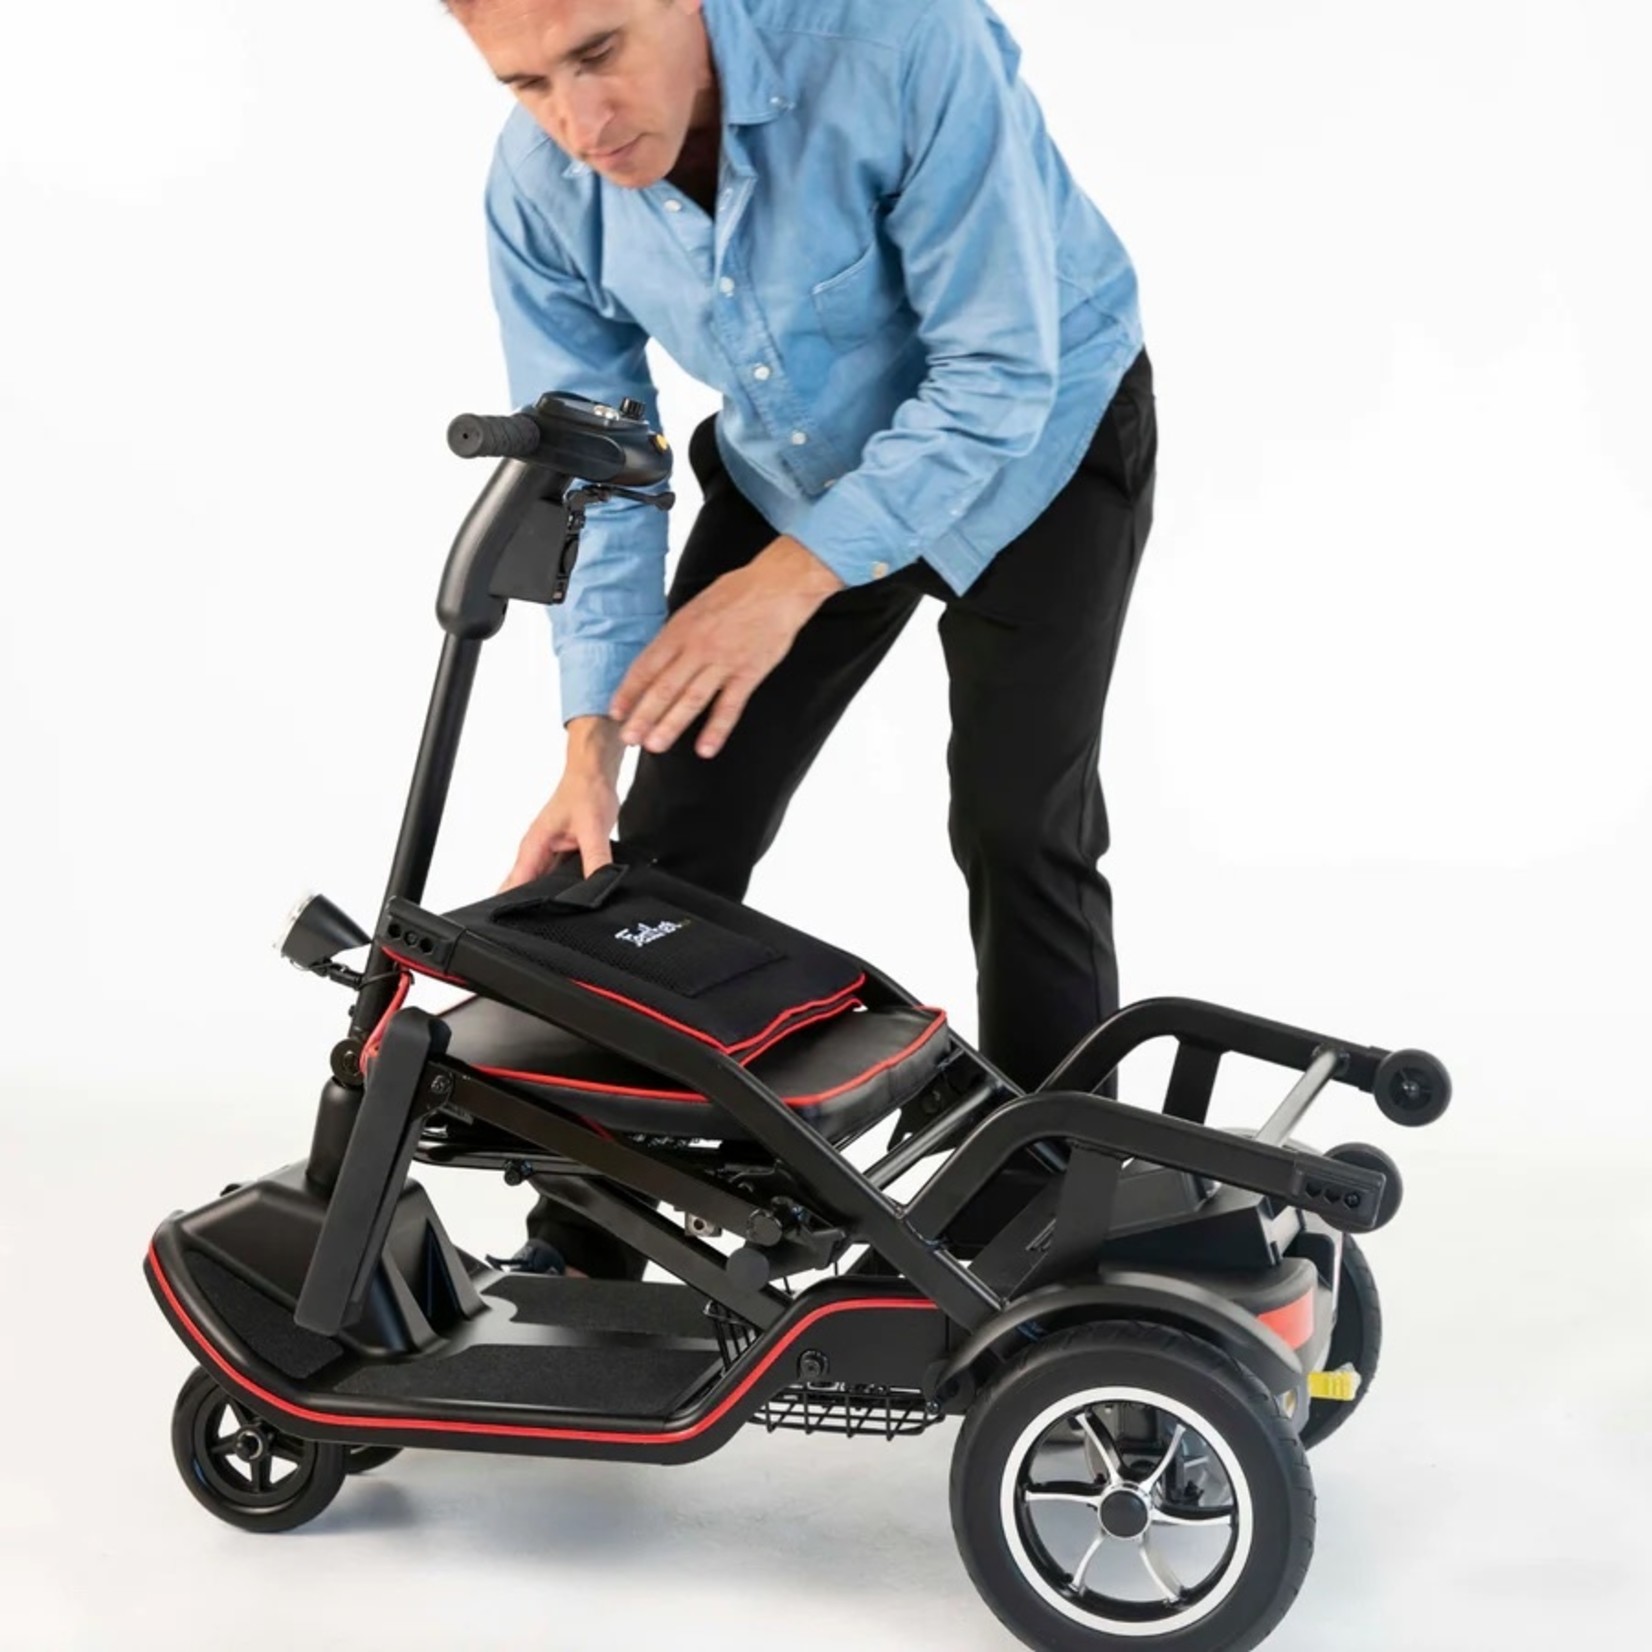 Feather Featherweight Scooter Lightest Electric Scooter 37 lbs.